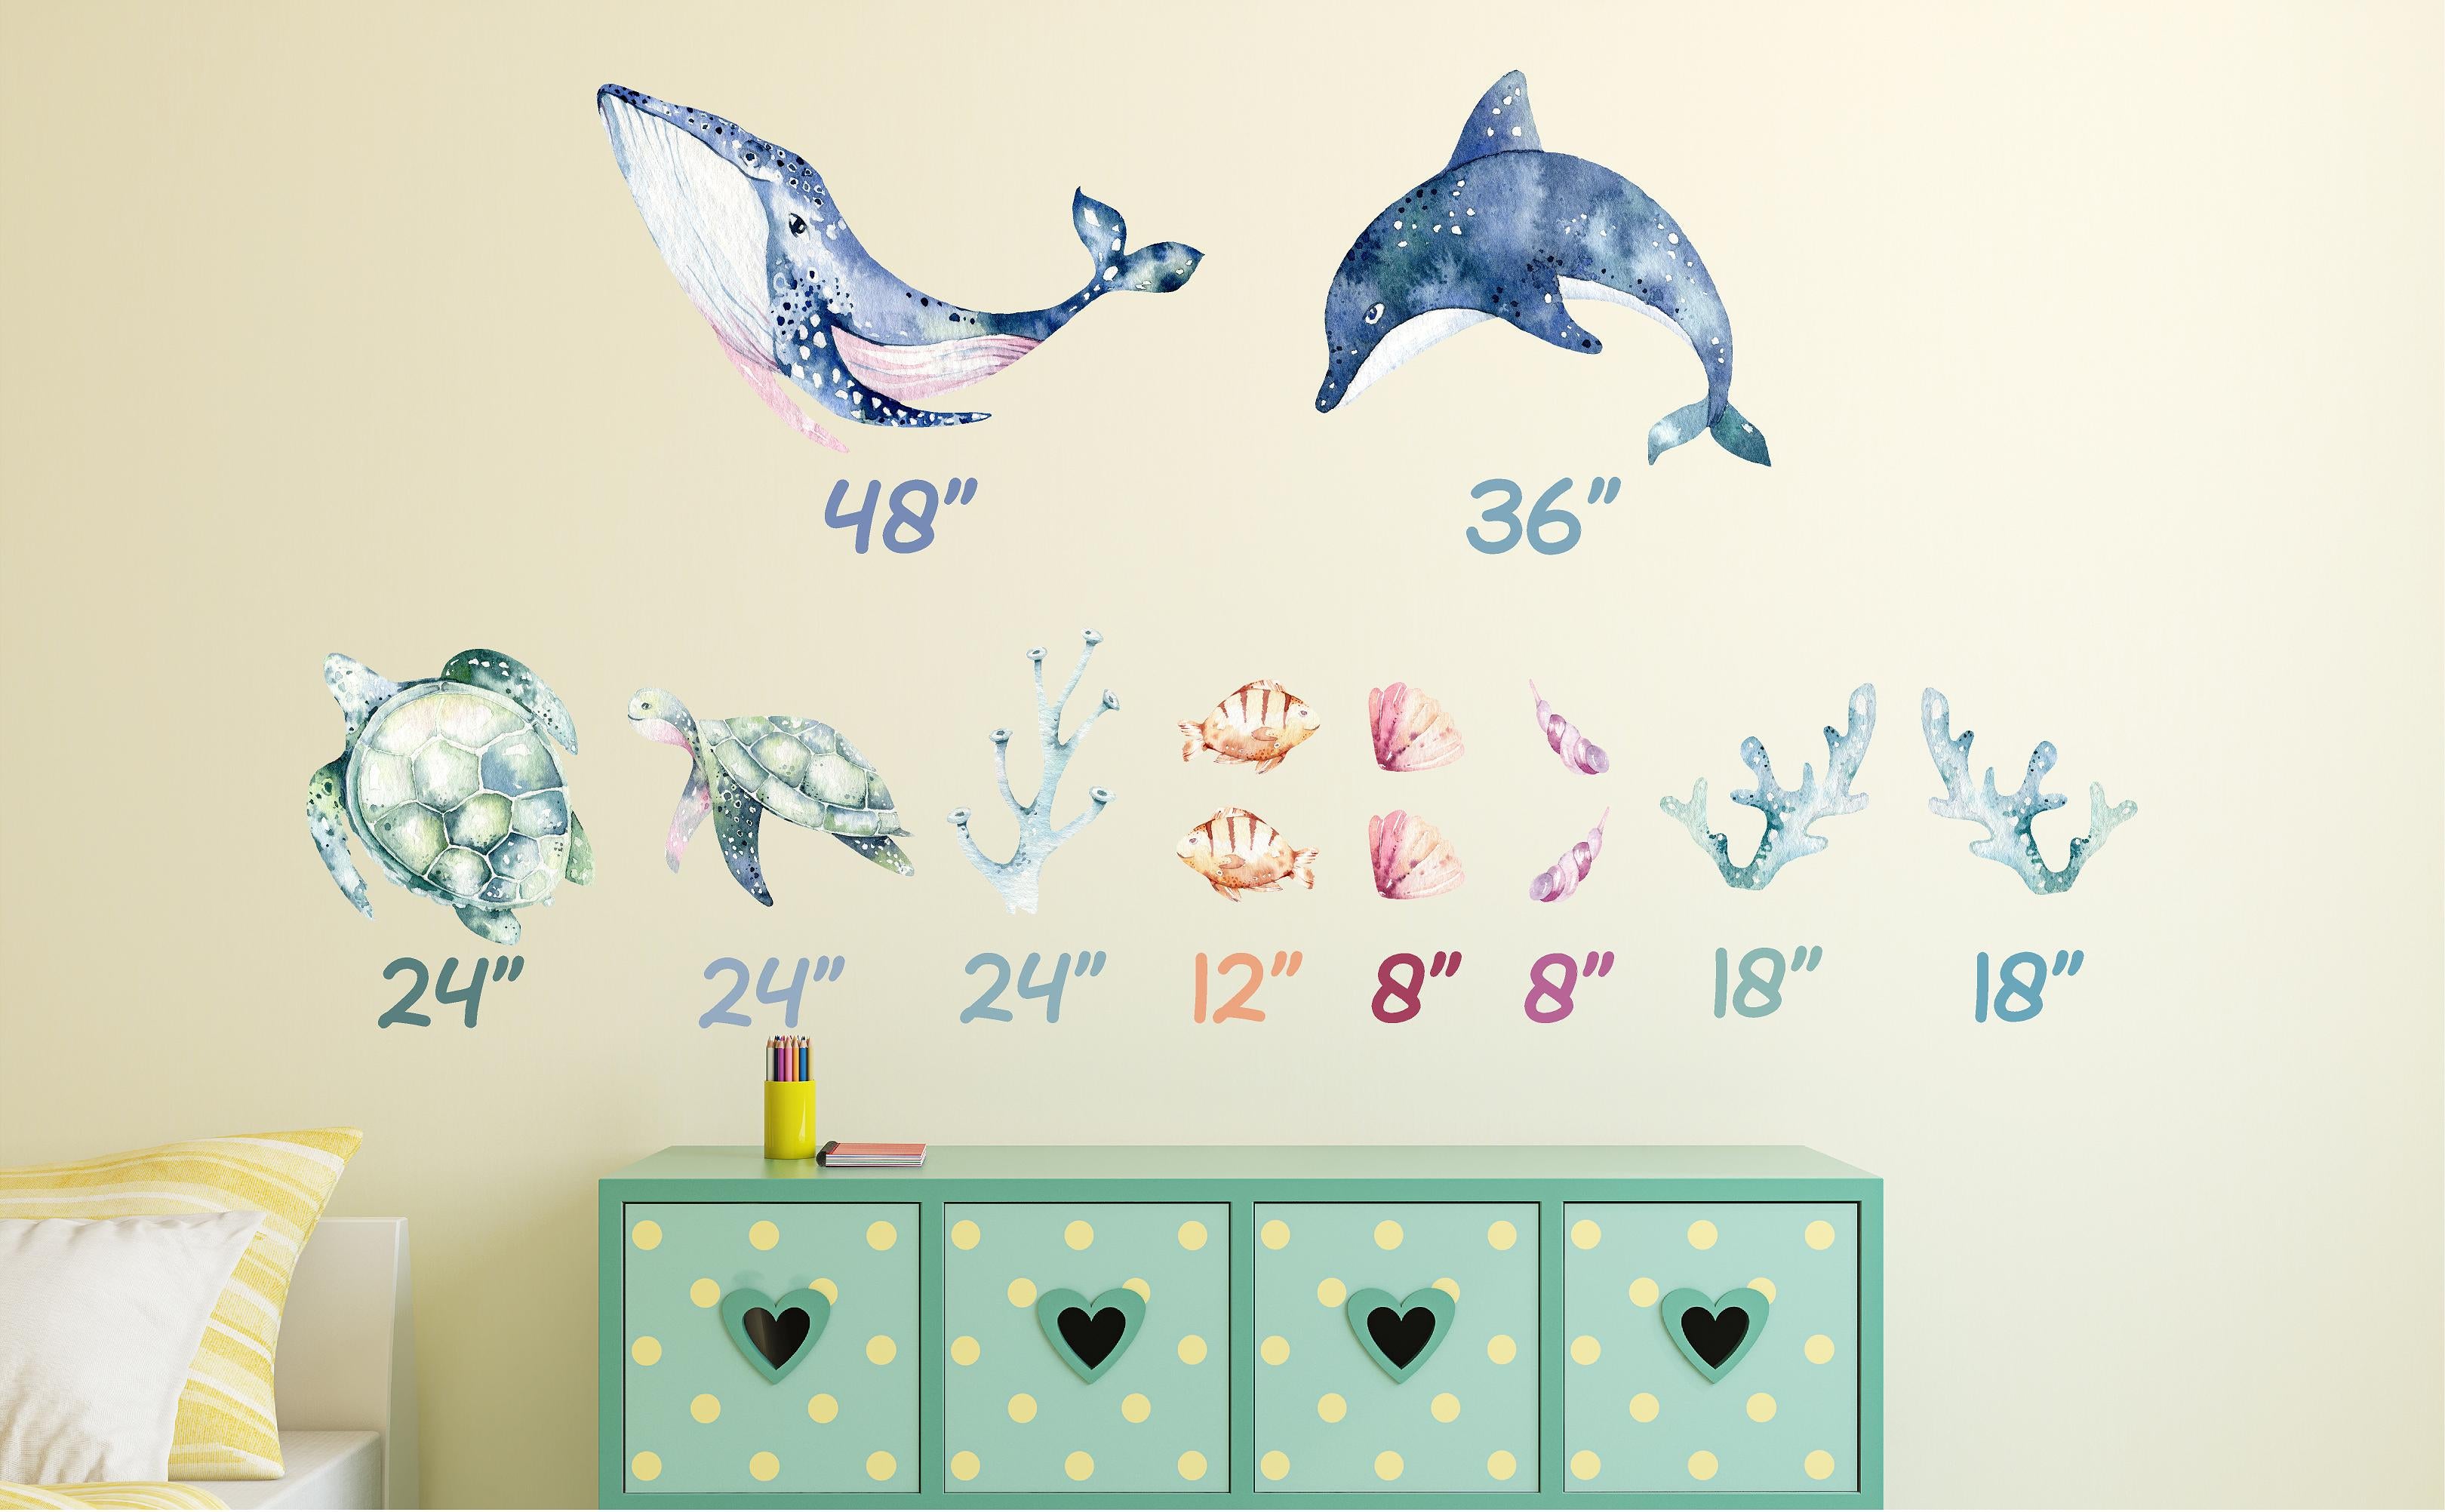 Whimsical Under The Sea Wall Decal Set #2 Ocean Sea Life Removable Fabric Wall Sticker | DecalBaby